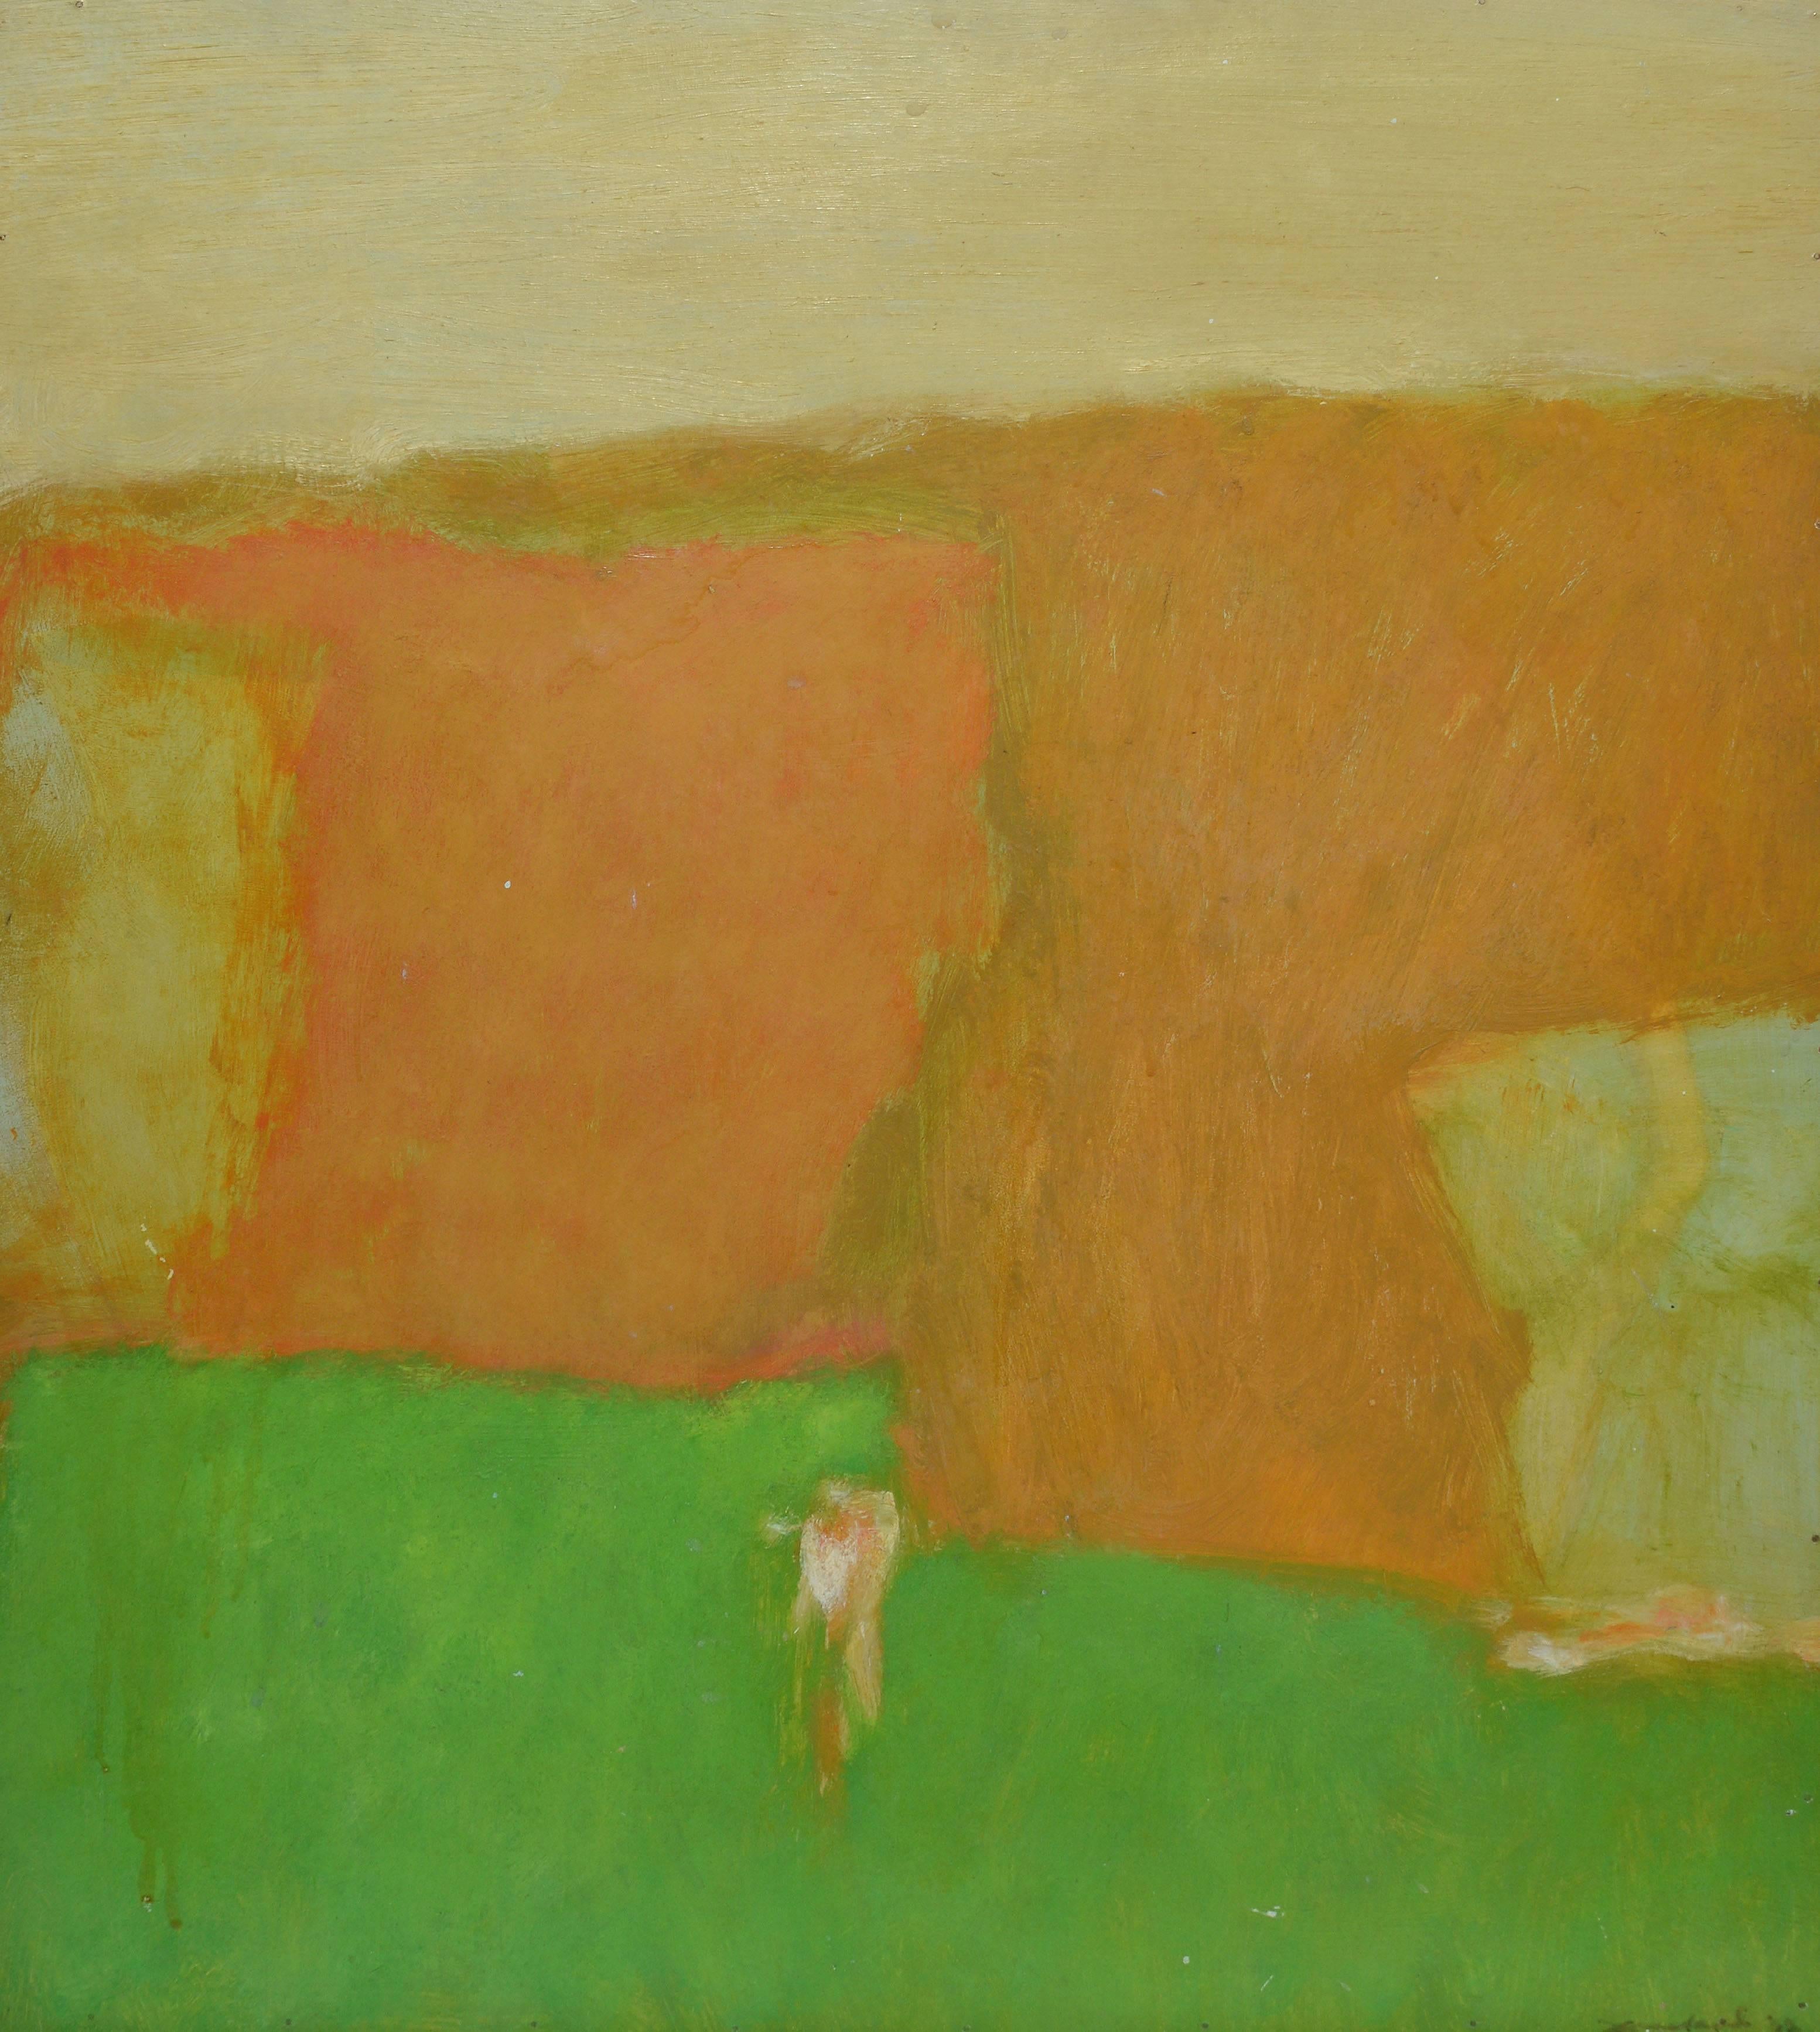 Abstract Landscape with a Figure - Abstract Expressionist Painting by Unknown